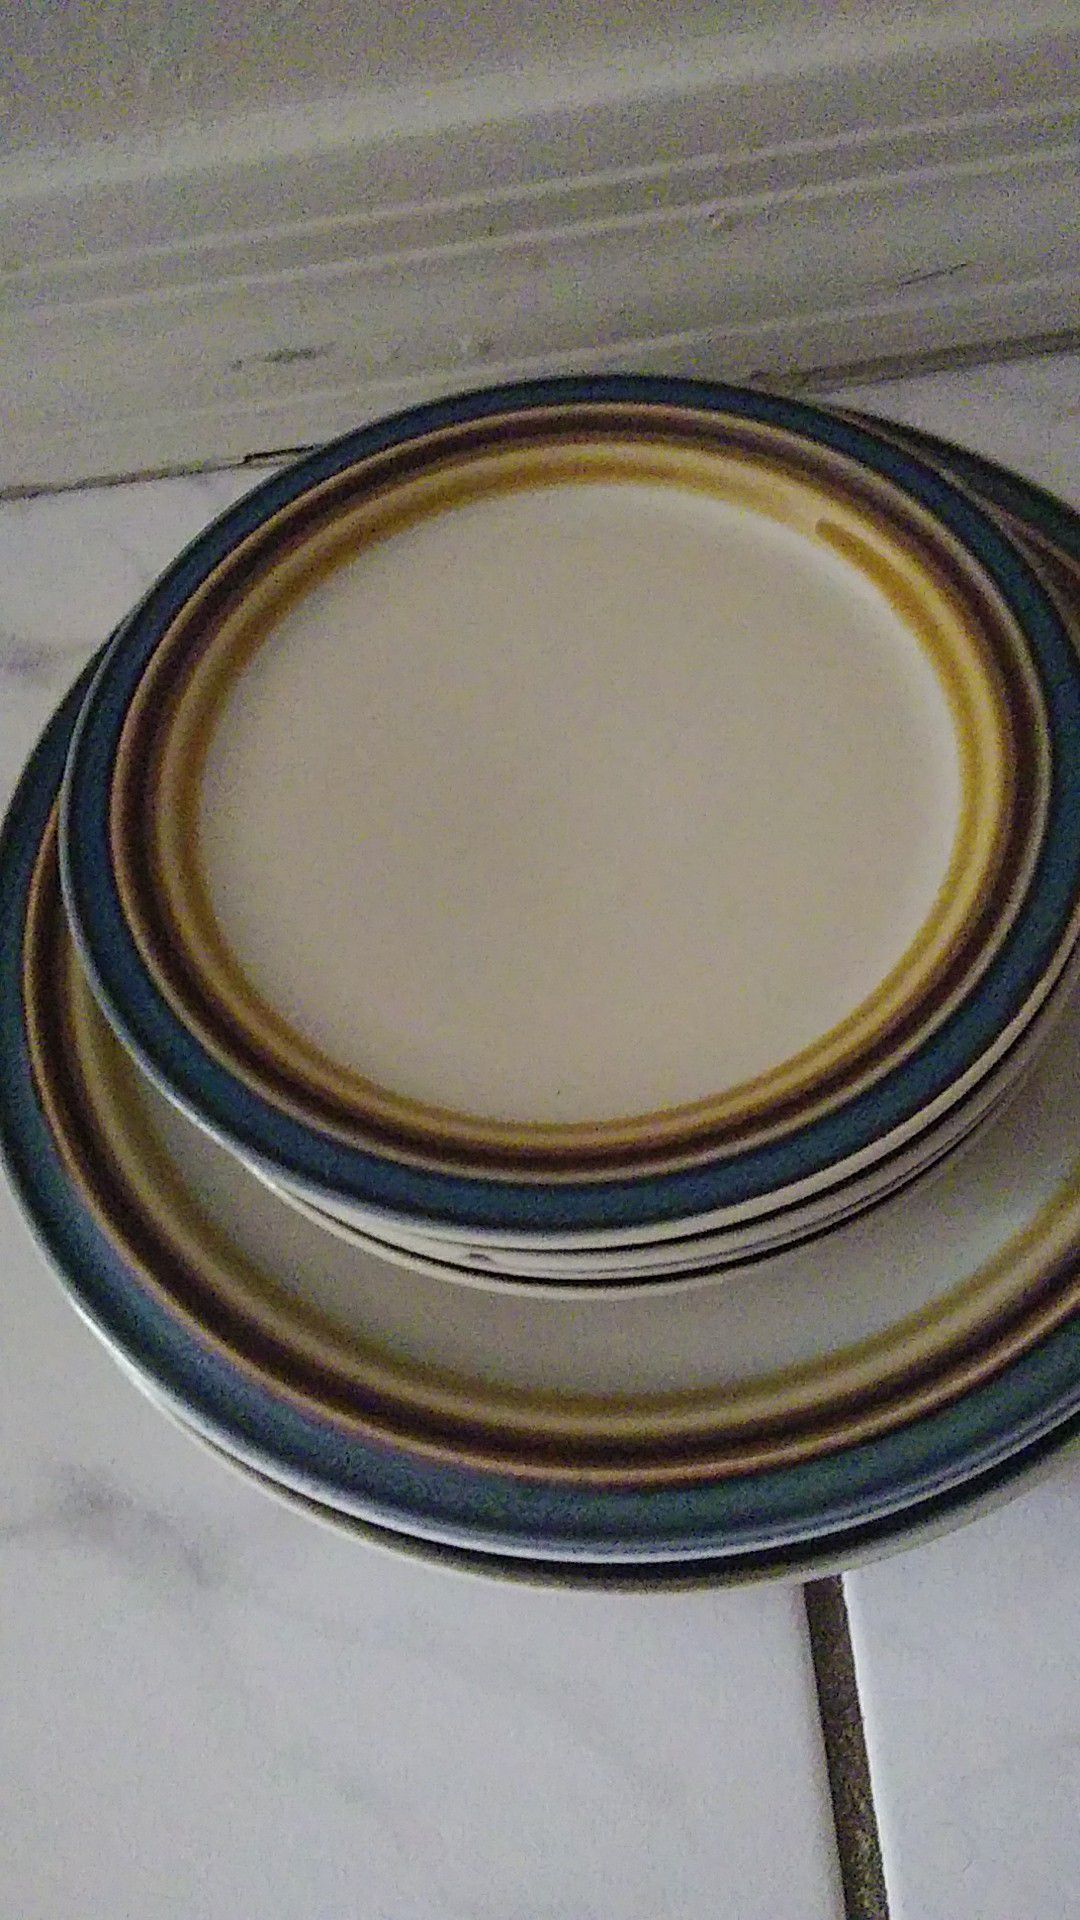 FREE plates to someone who (needs) !!!